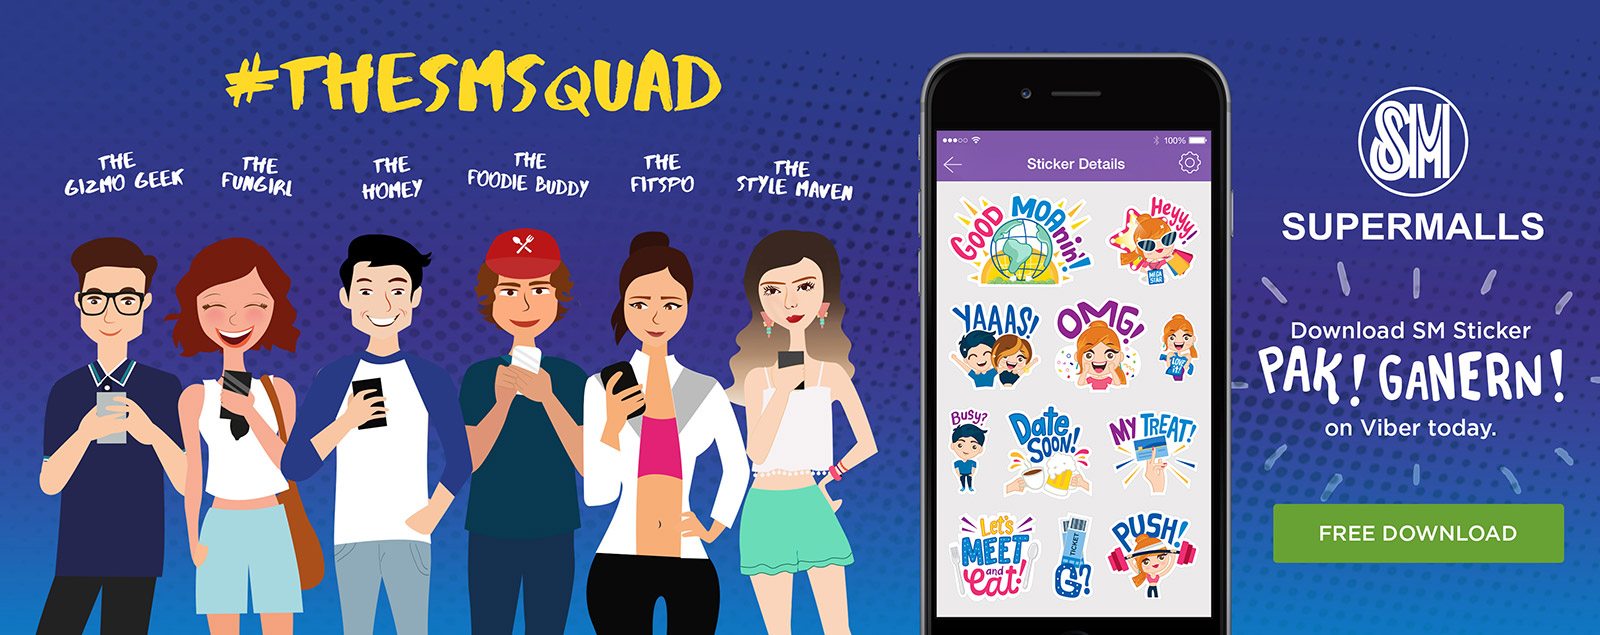 SM SUPERMALLS IS ON VIBER! PAK NA PUBLIC CHAT WITH GANERN NA STICKERS!